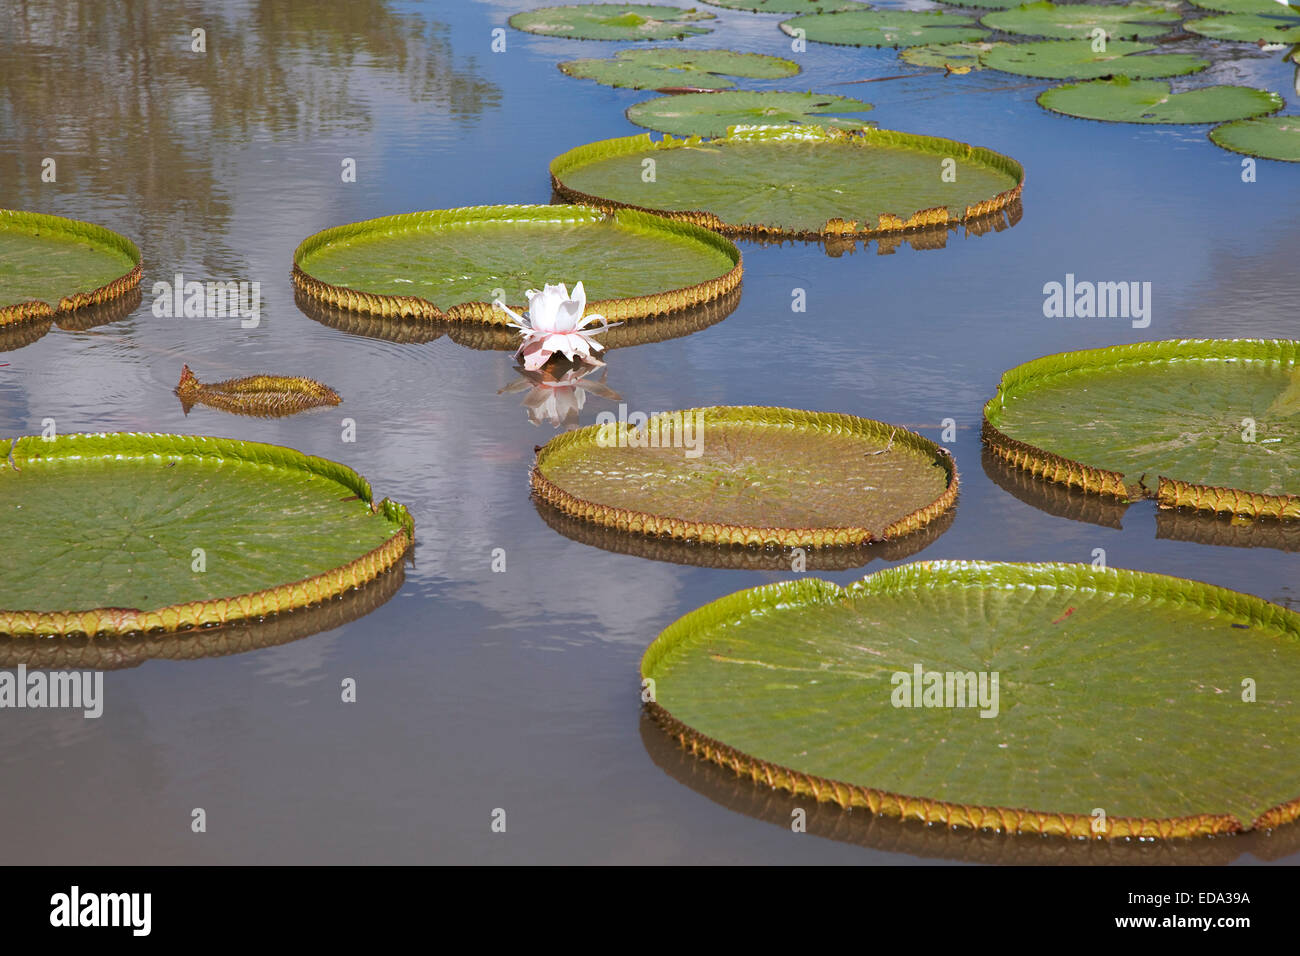 Giant leaves of the king lotus / Victoria amazonica in the Botanical Gardens of Menglun, Yunnan province, China Stock Photo